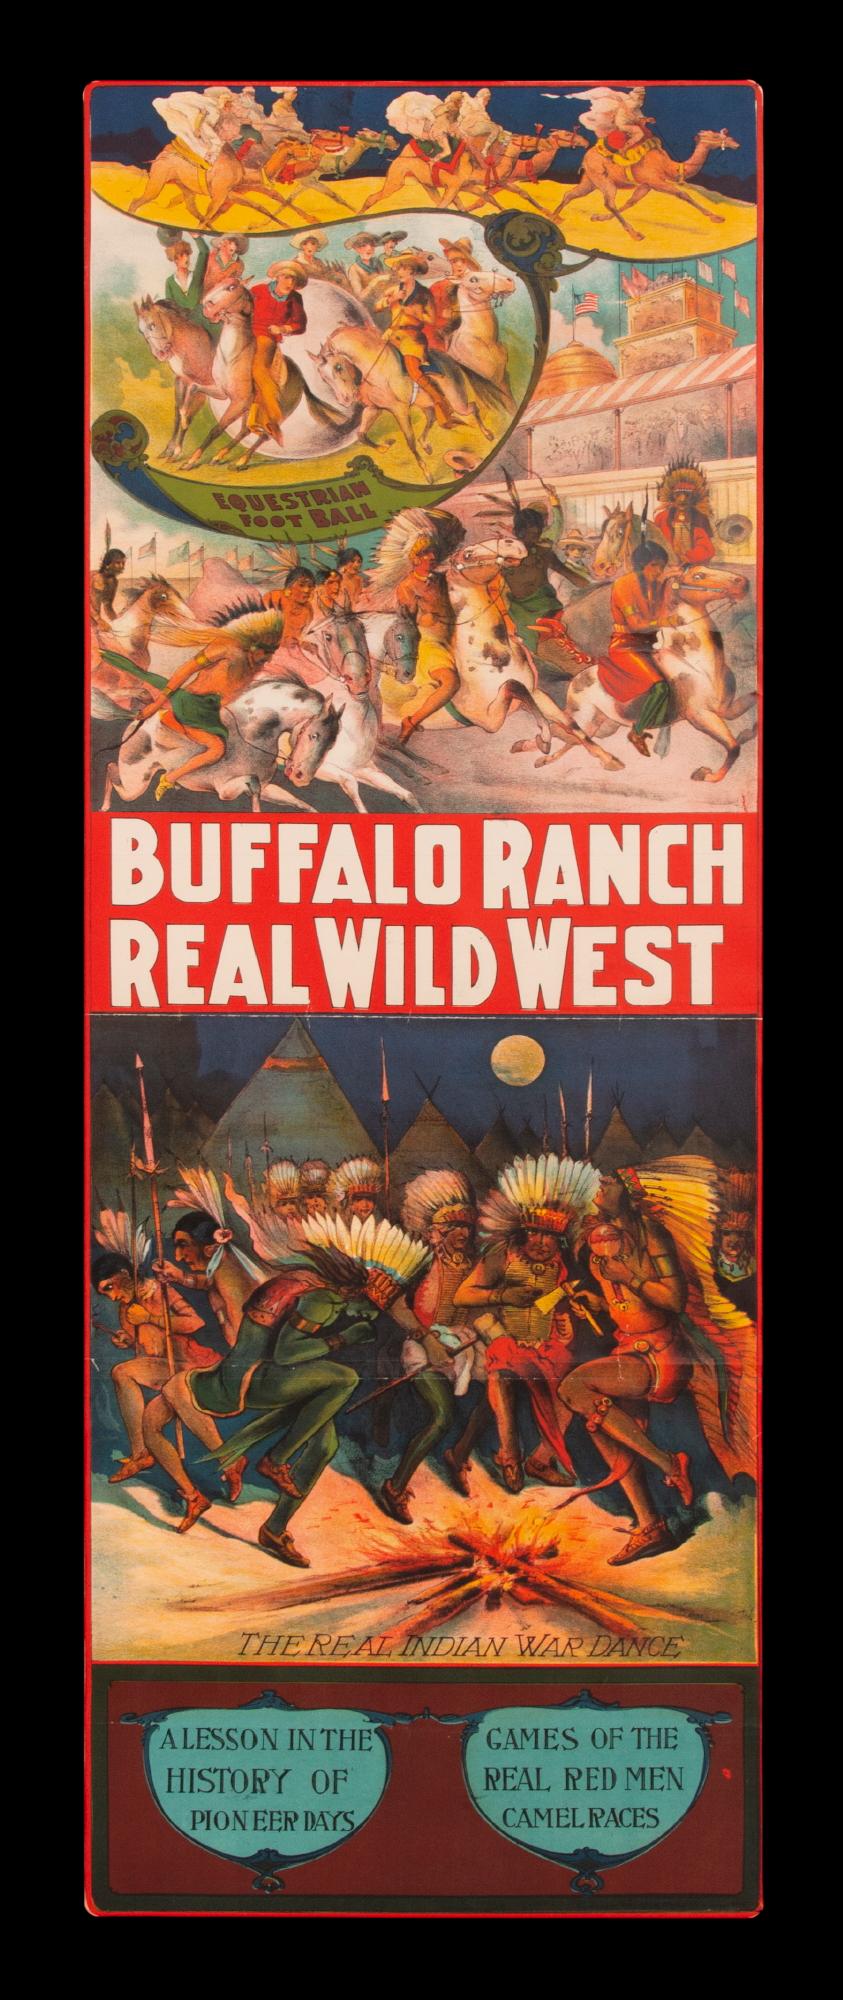 Three-sheet, narrow, vertical broadside, made to advertise Hunt Brothers Circus and Wild West Show ca 1900-1910. With the bold headlines “Buffalo Ranch” and “Real Wild West” in red and white, on the center sheet, the elaborate and strikingly